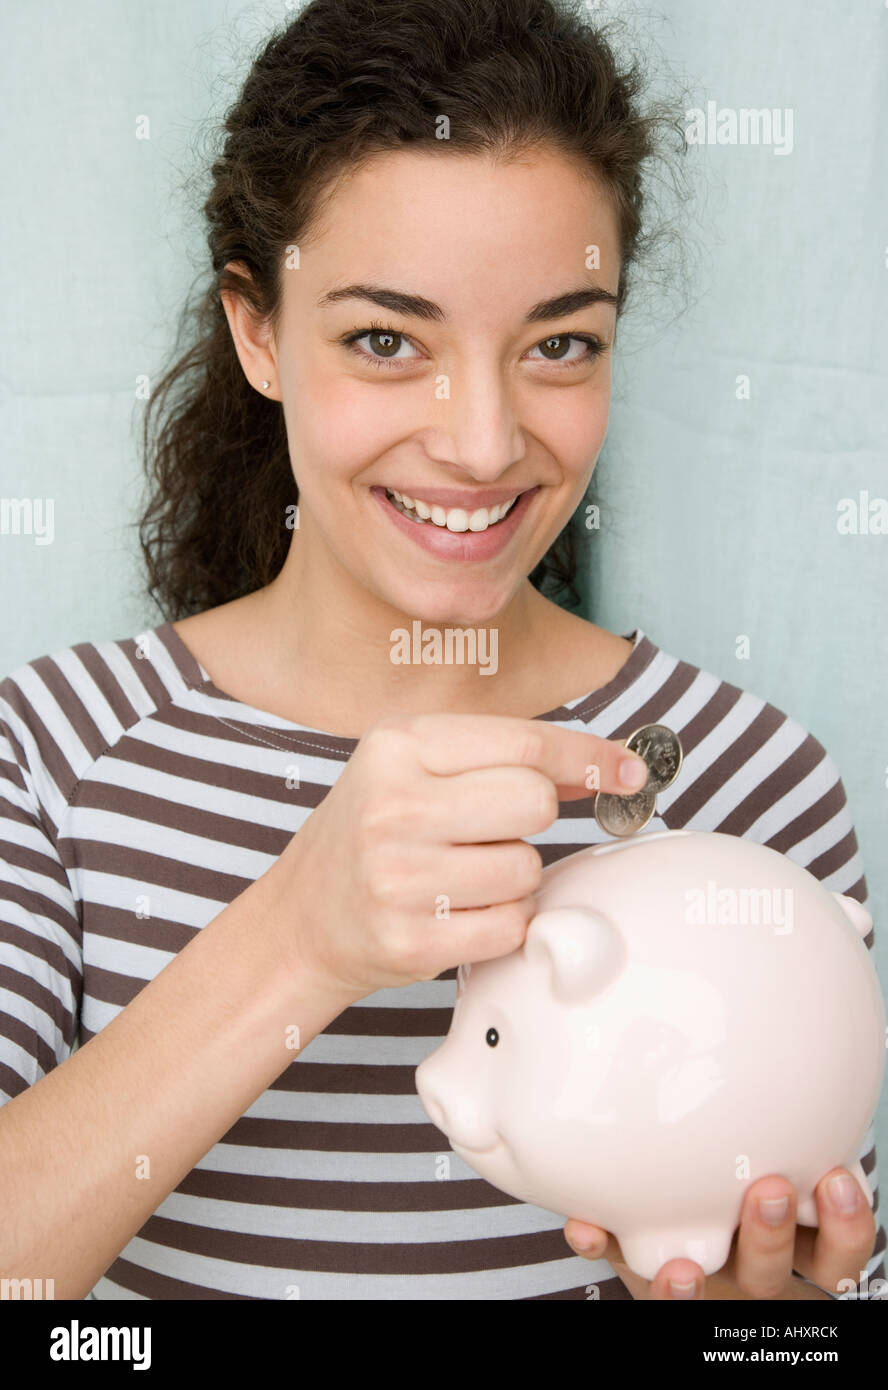 Woman putting coins in piggy bank Stock Photo